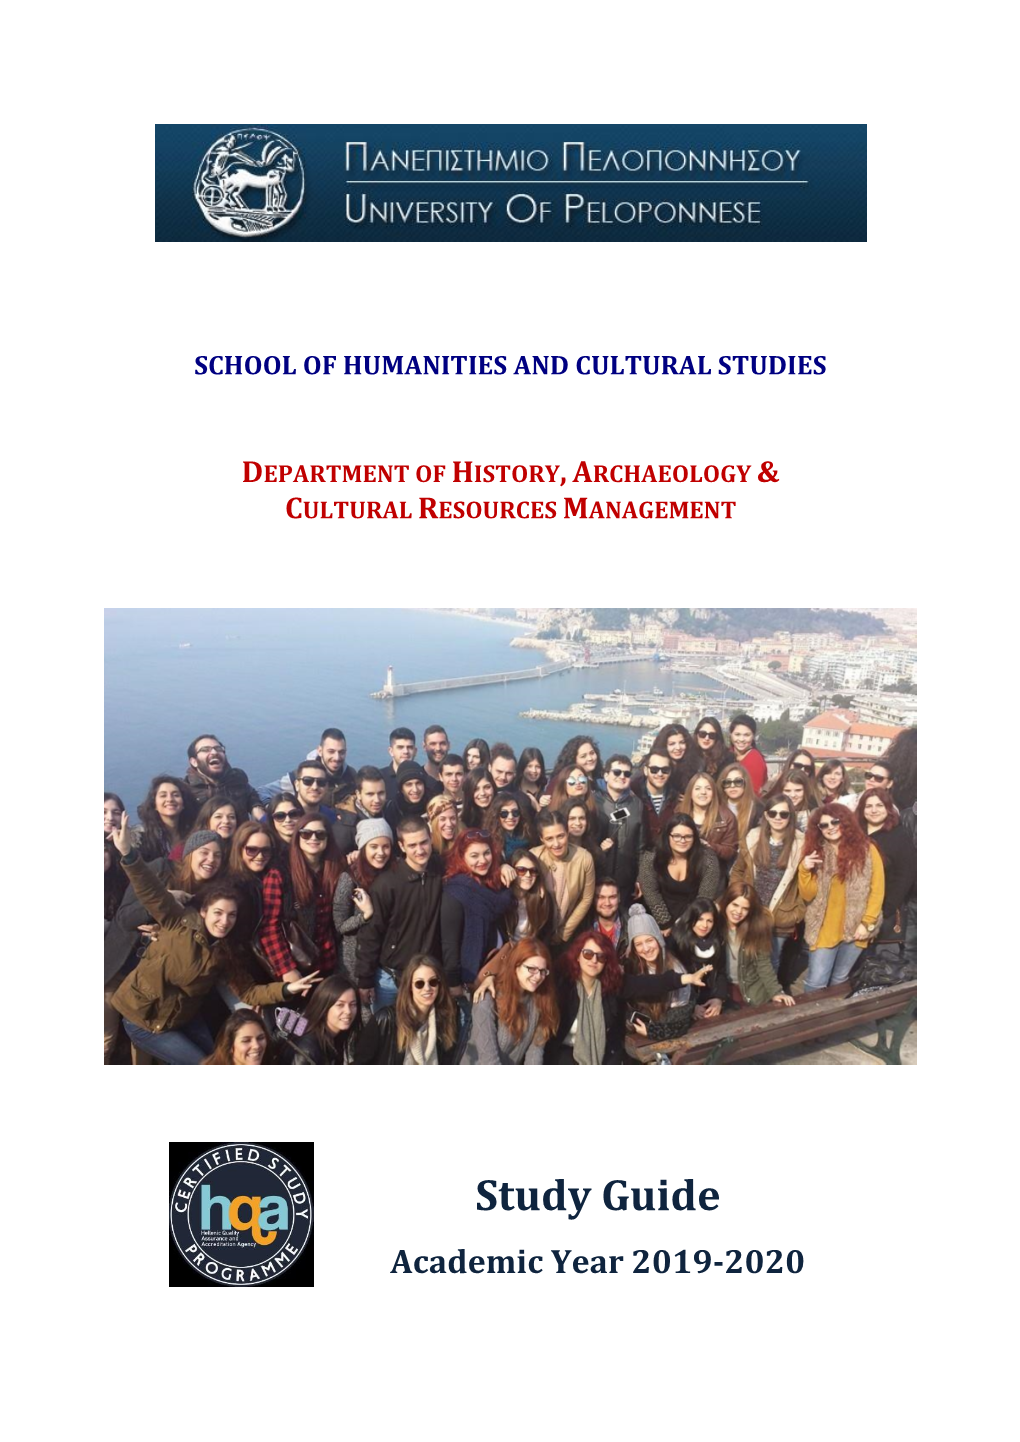 Study Guide Academic Year 2019-2020